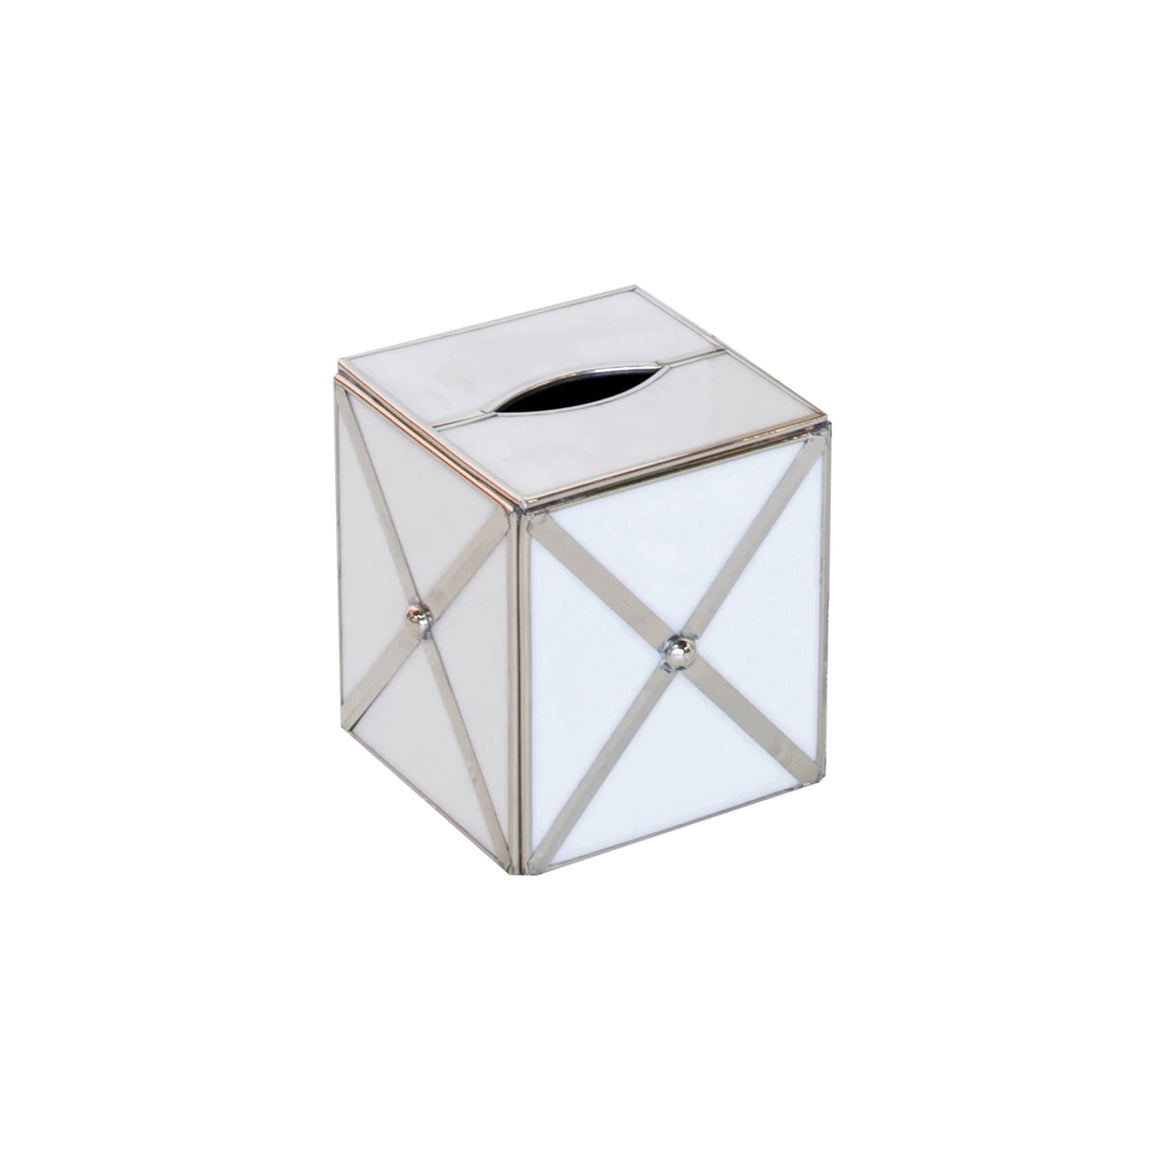 Worlds Away Tissue Box Cover - White Glass & Silver